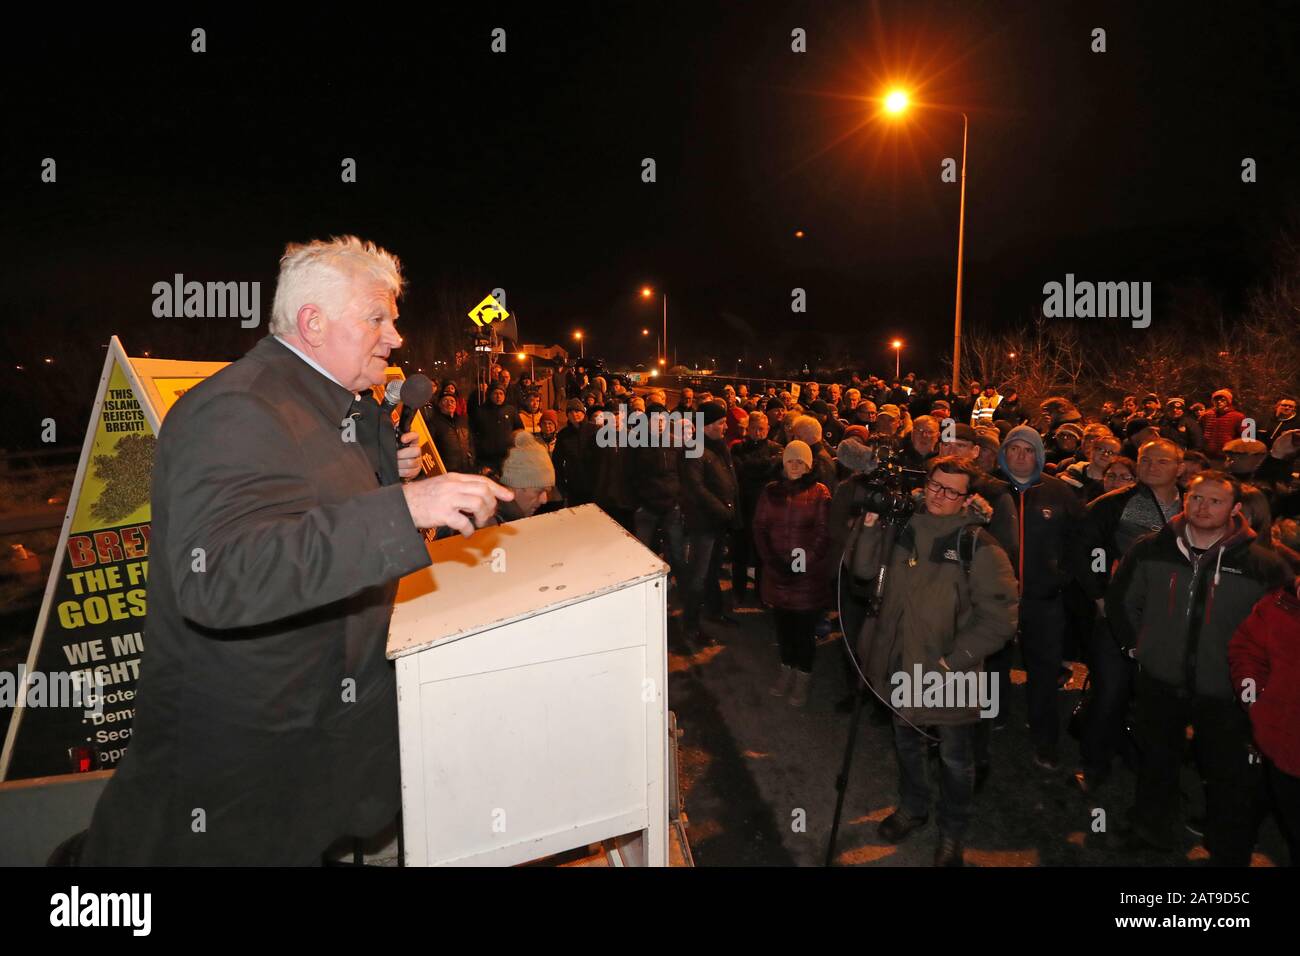 Declan Fearon from the campaign group Border Communities Against Brexit during a demonstration in Carrickcarnon on the Irish border, ahead of the UK leaving the European Union at 11pm on Friday. Stock Photo